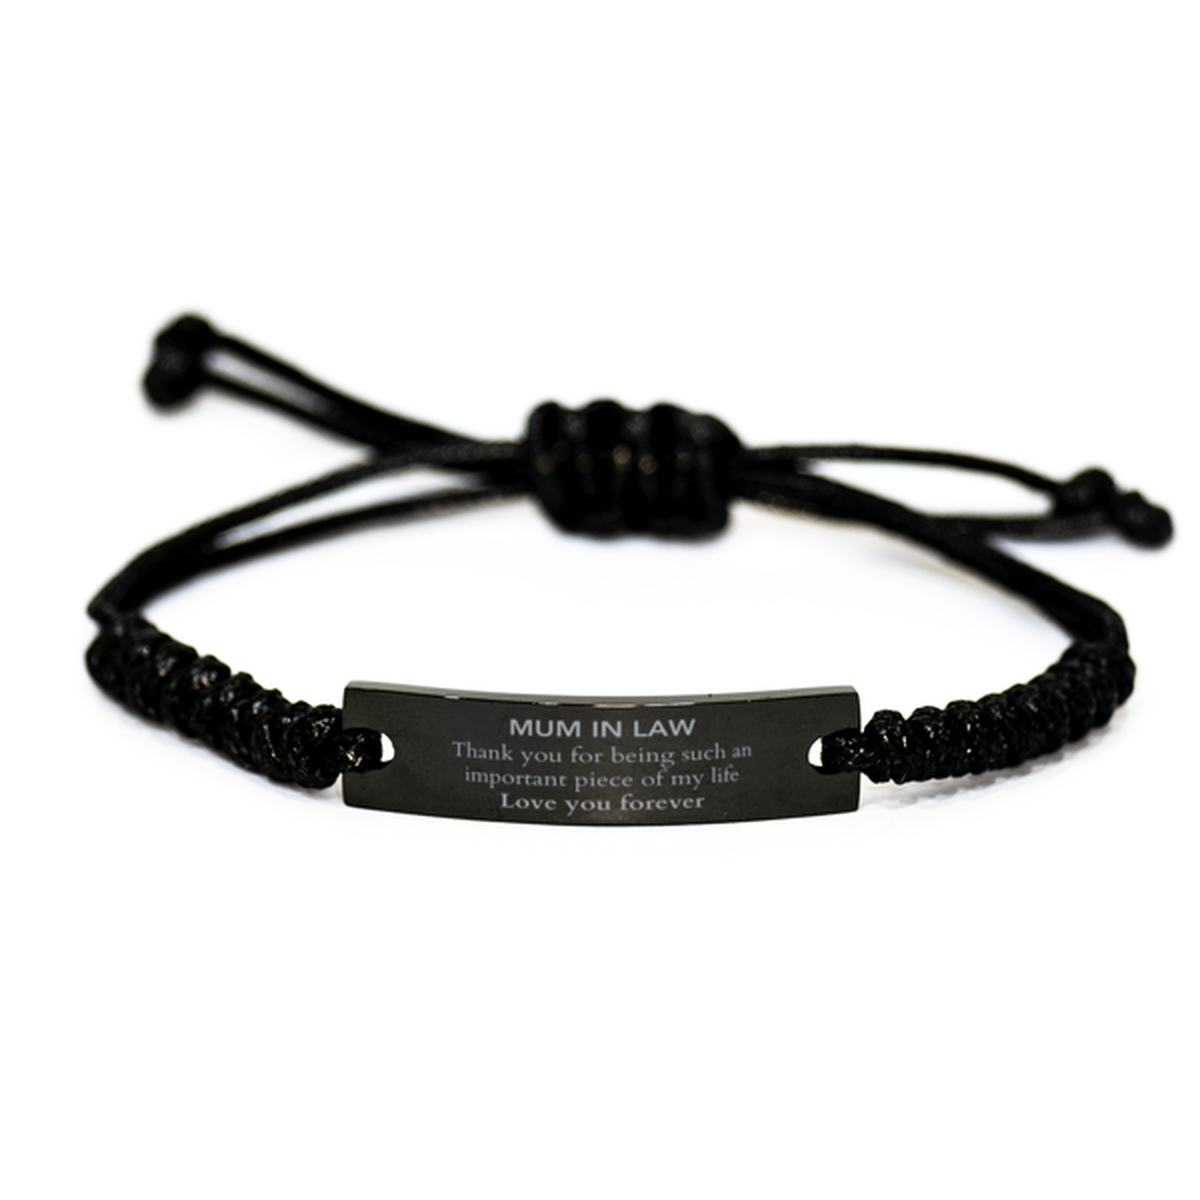 Appropriate Mum In Law  Black Rope Bracelet Epic Birthday Gifts for Mum In Law  Thank you for being such an important piece of my life Mum In Law  Christmas Mothers Fathers Day